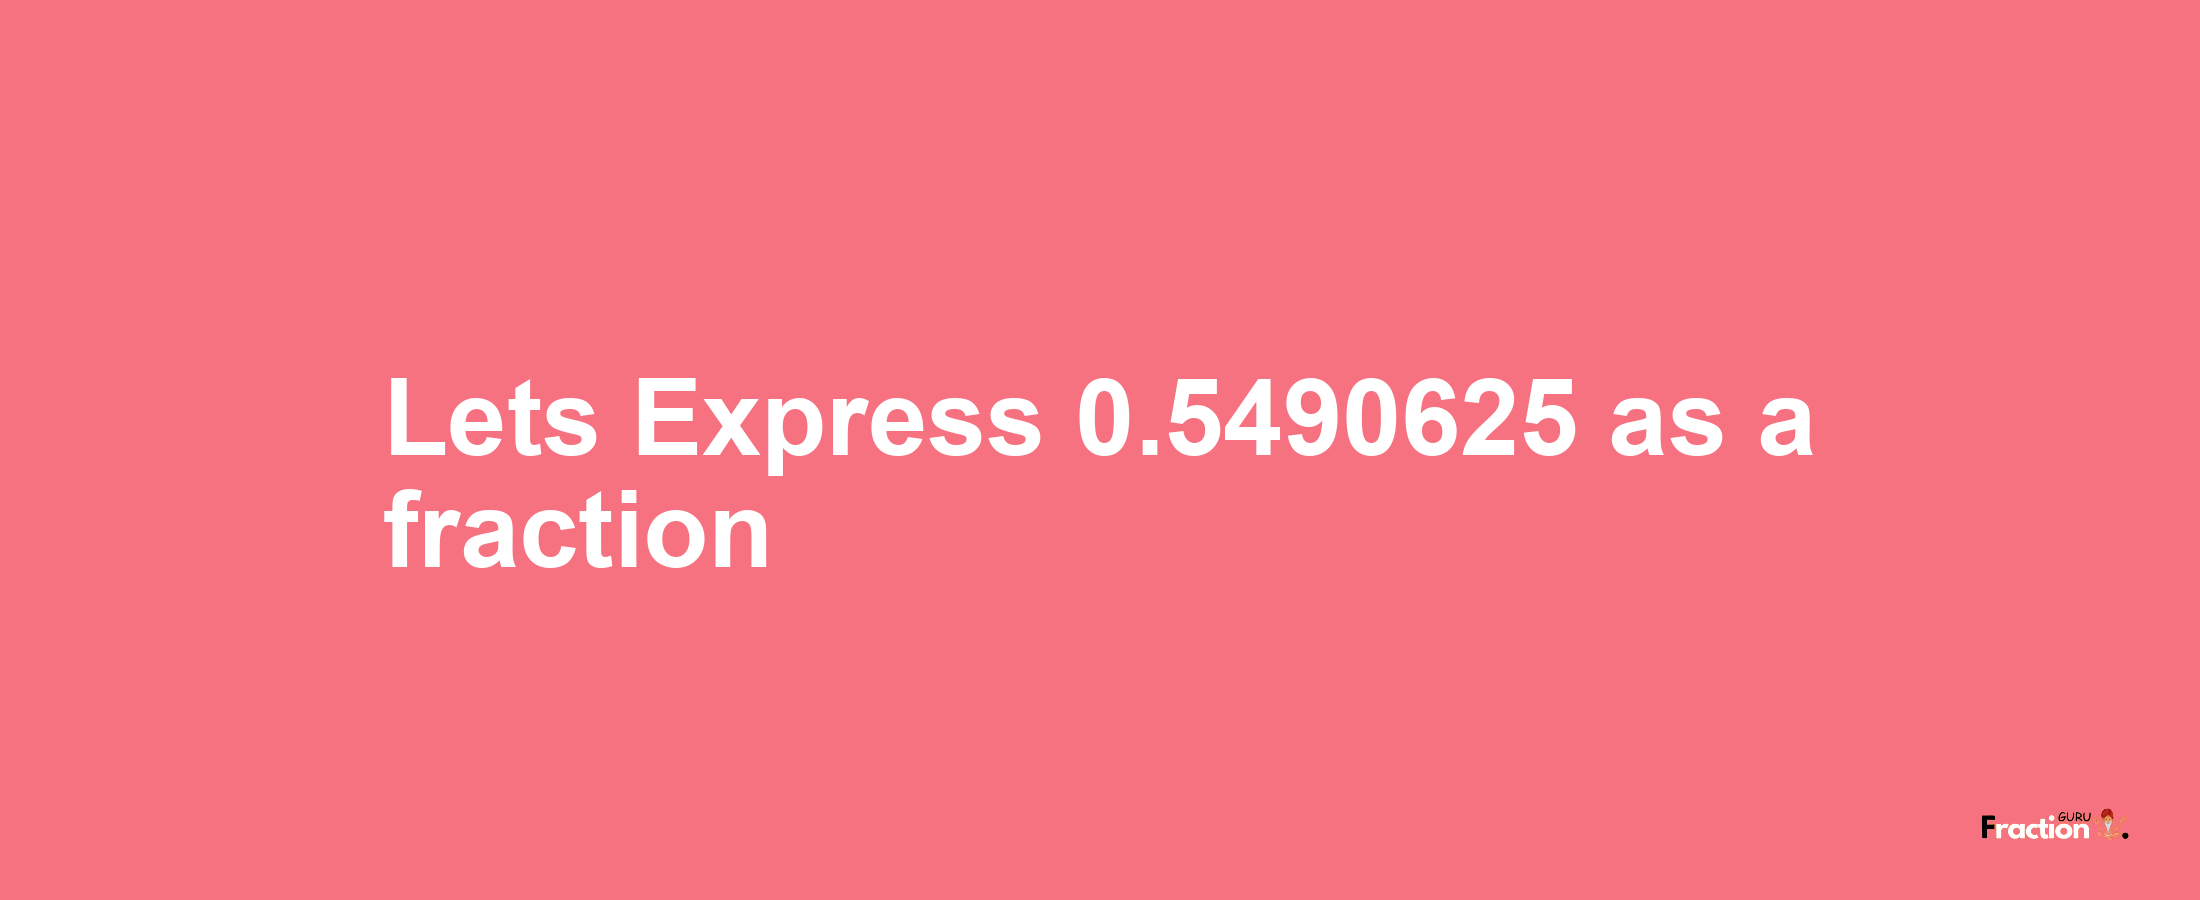 Lets Express 0.5490625 as afraction